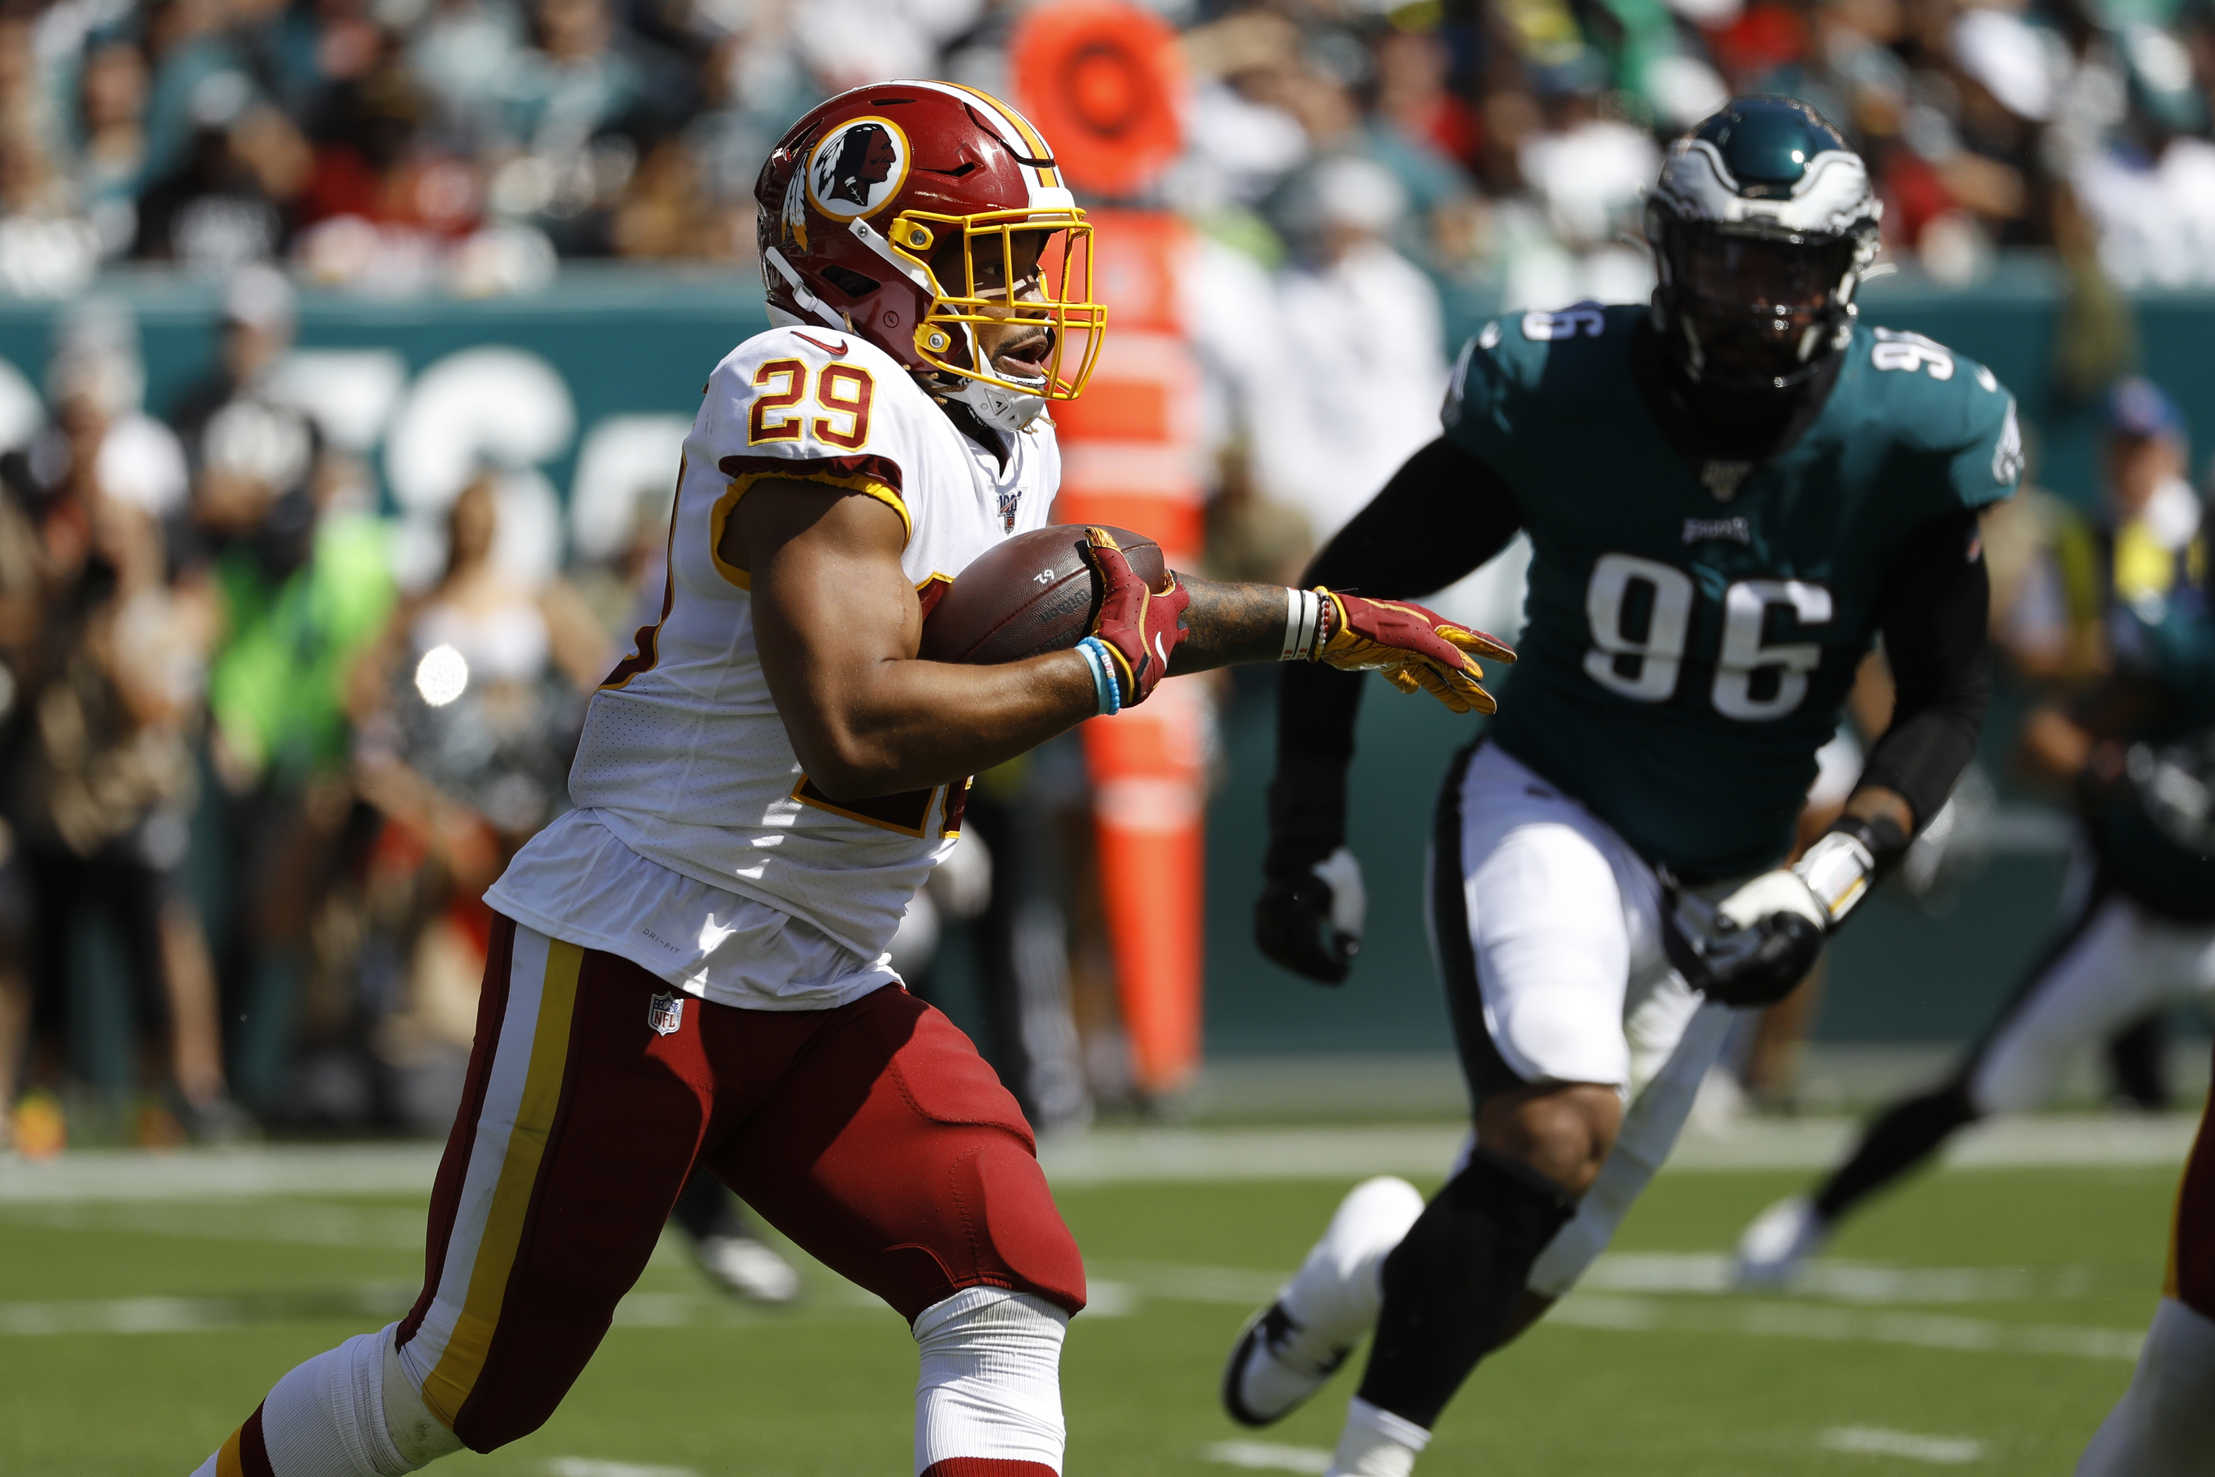 AP source: Redskins RB Guice undergoes MRI on right knee